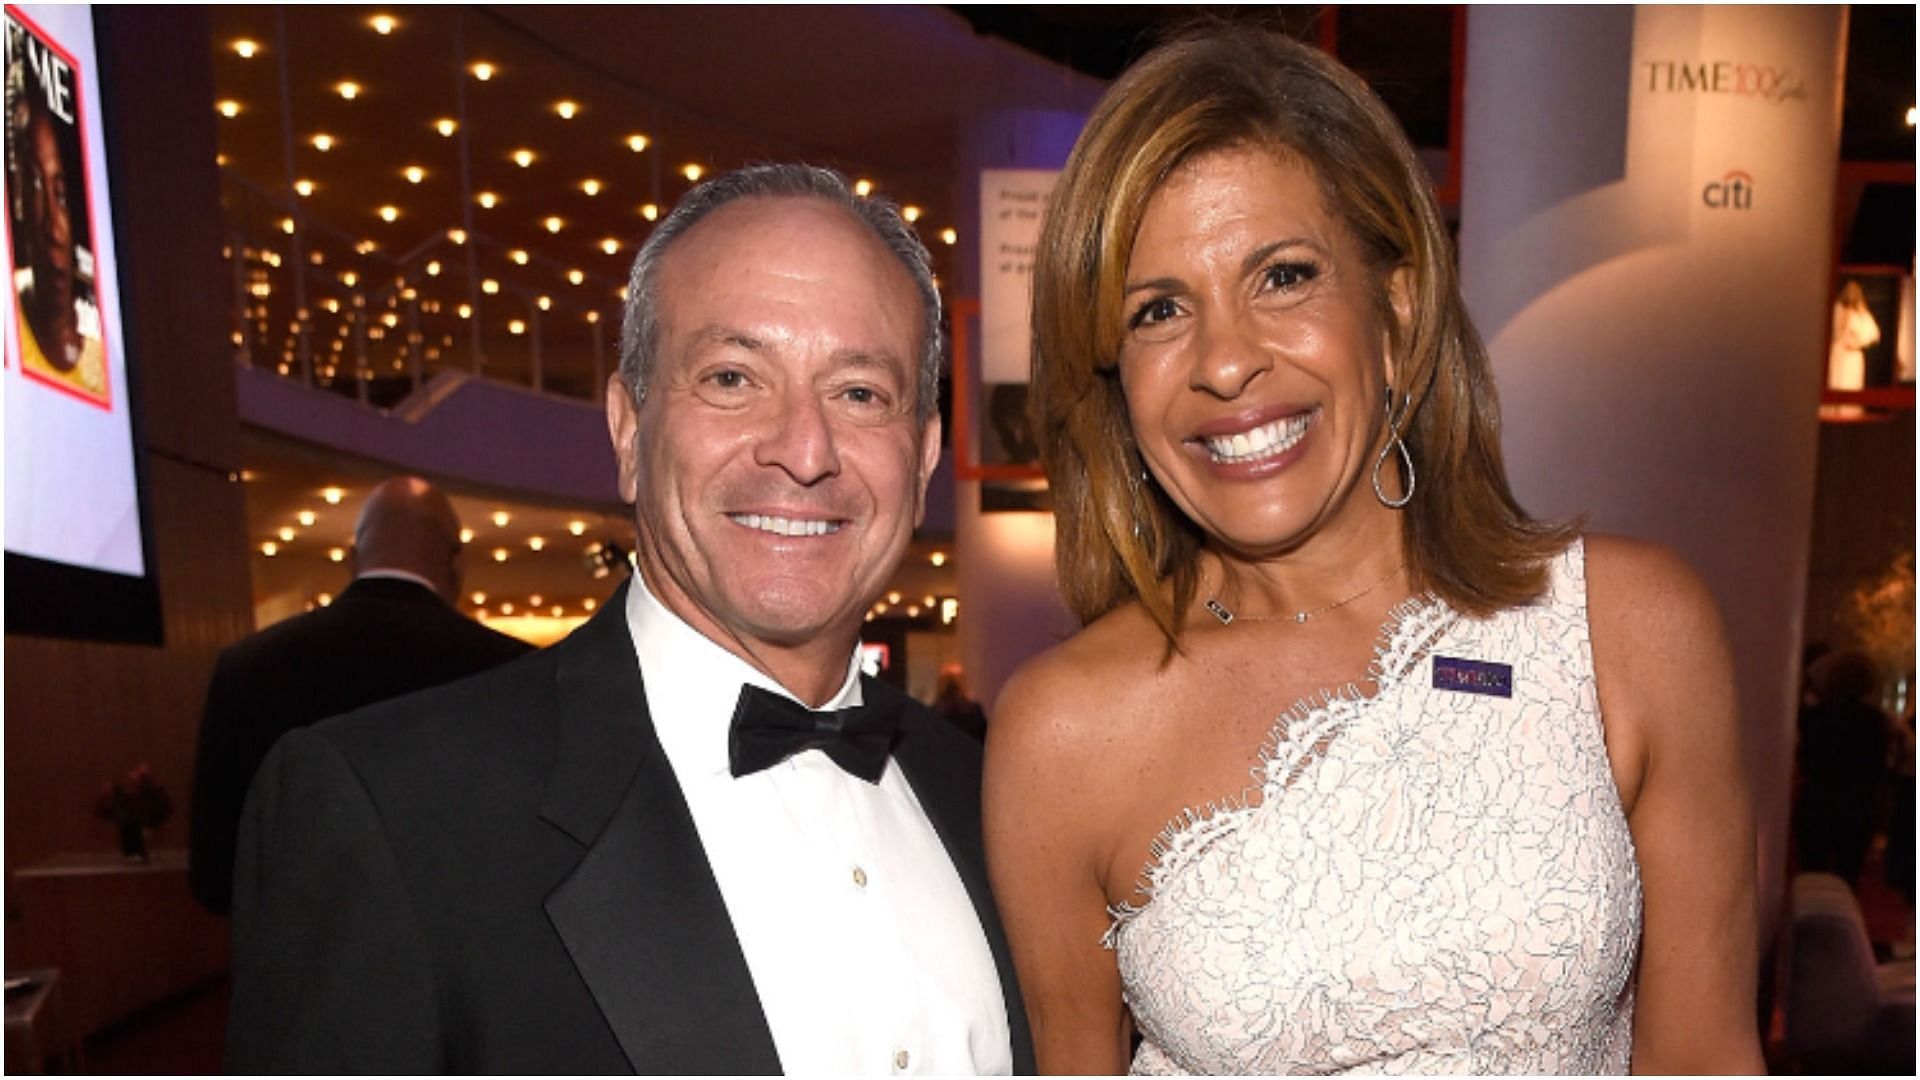 Hoda Kotb and Joel Schiffman got engaged in 2019 (Image via Kevin Mazur/Getty Images)